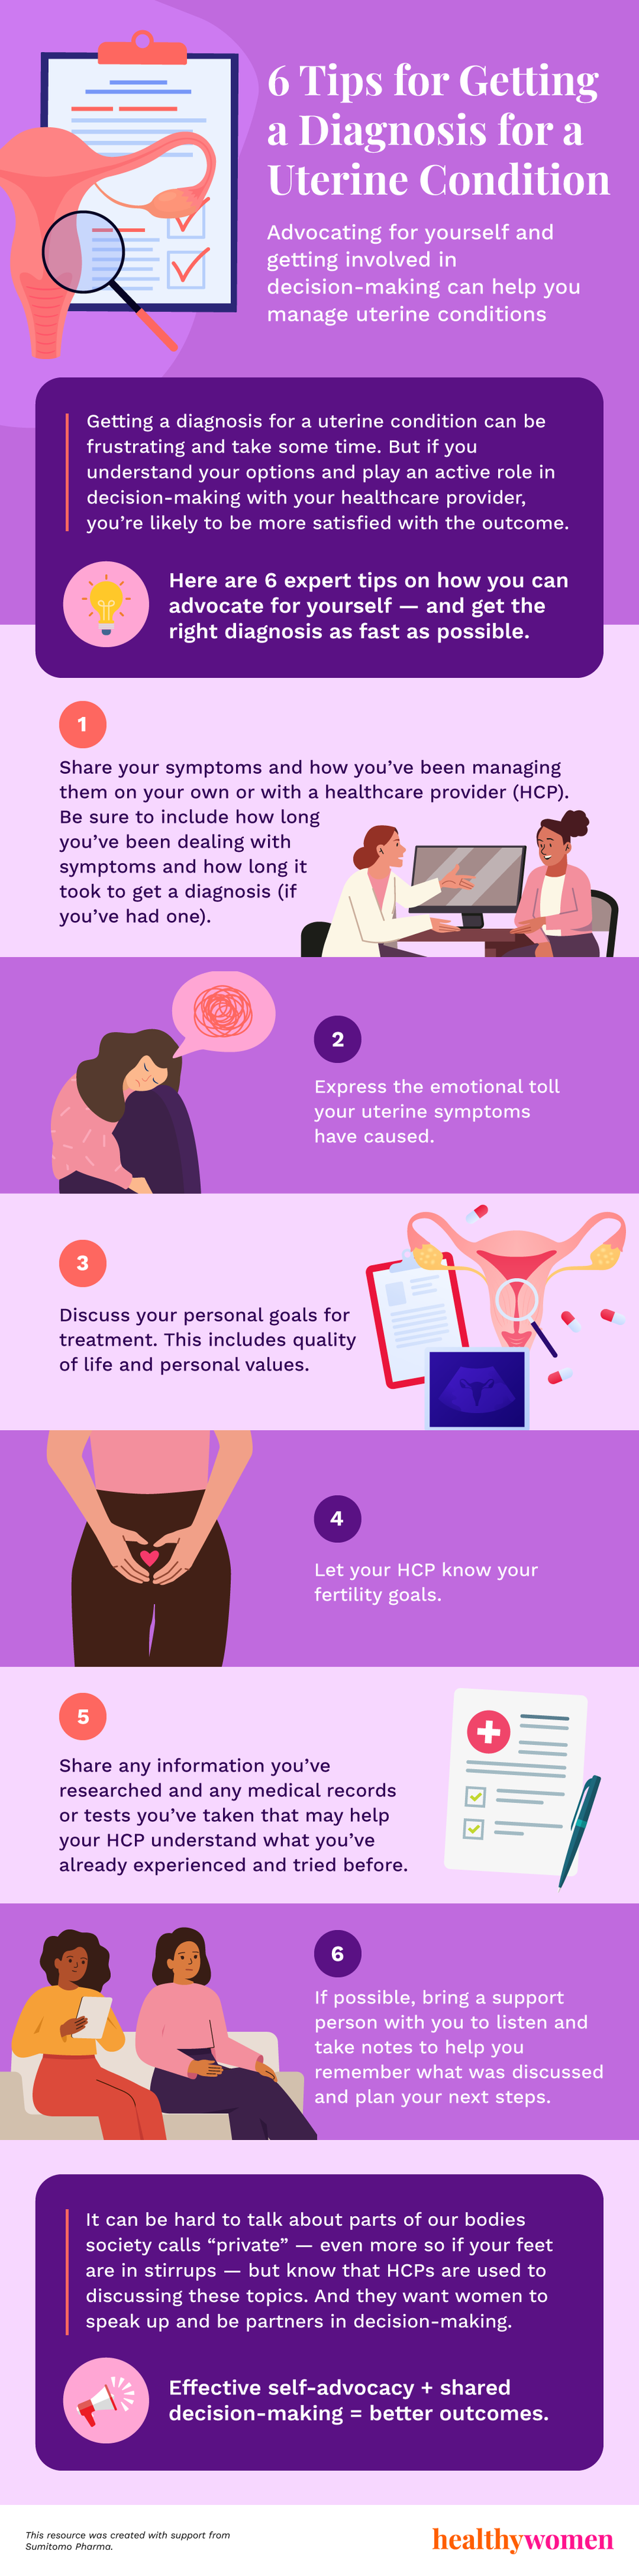 6 Tips for Getting a Diagnosis for a Uterine Condition Infographic. Click image to view PDF